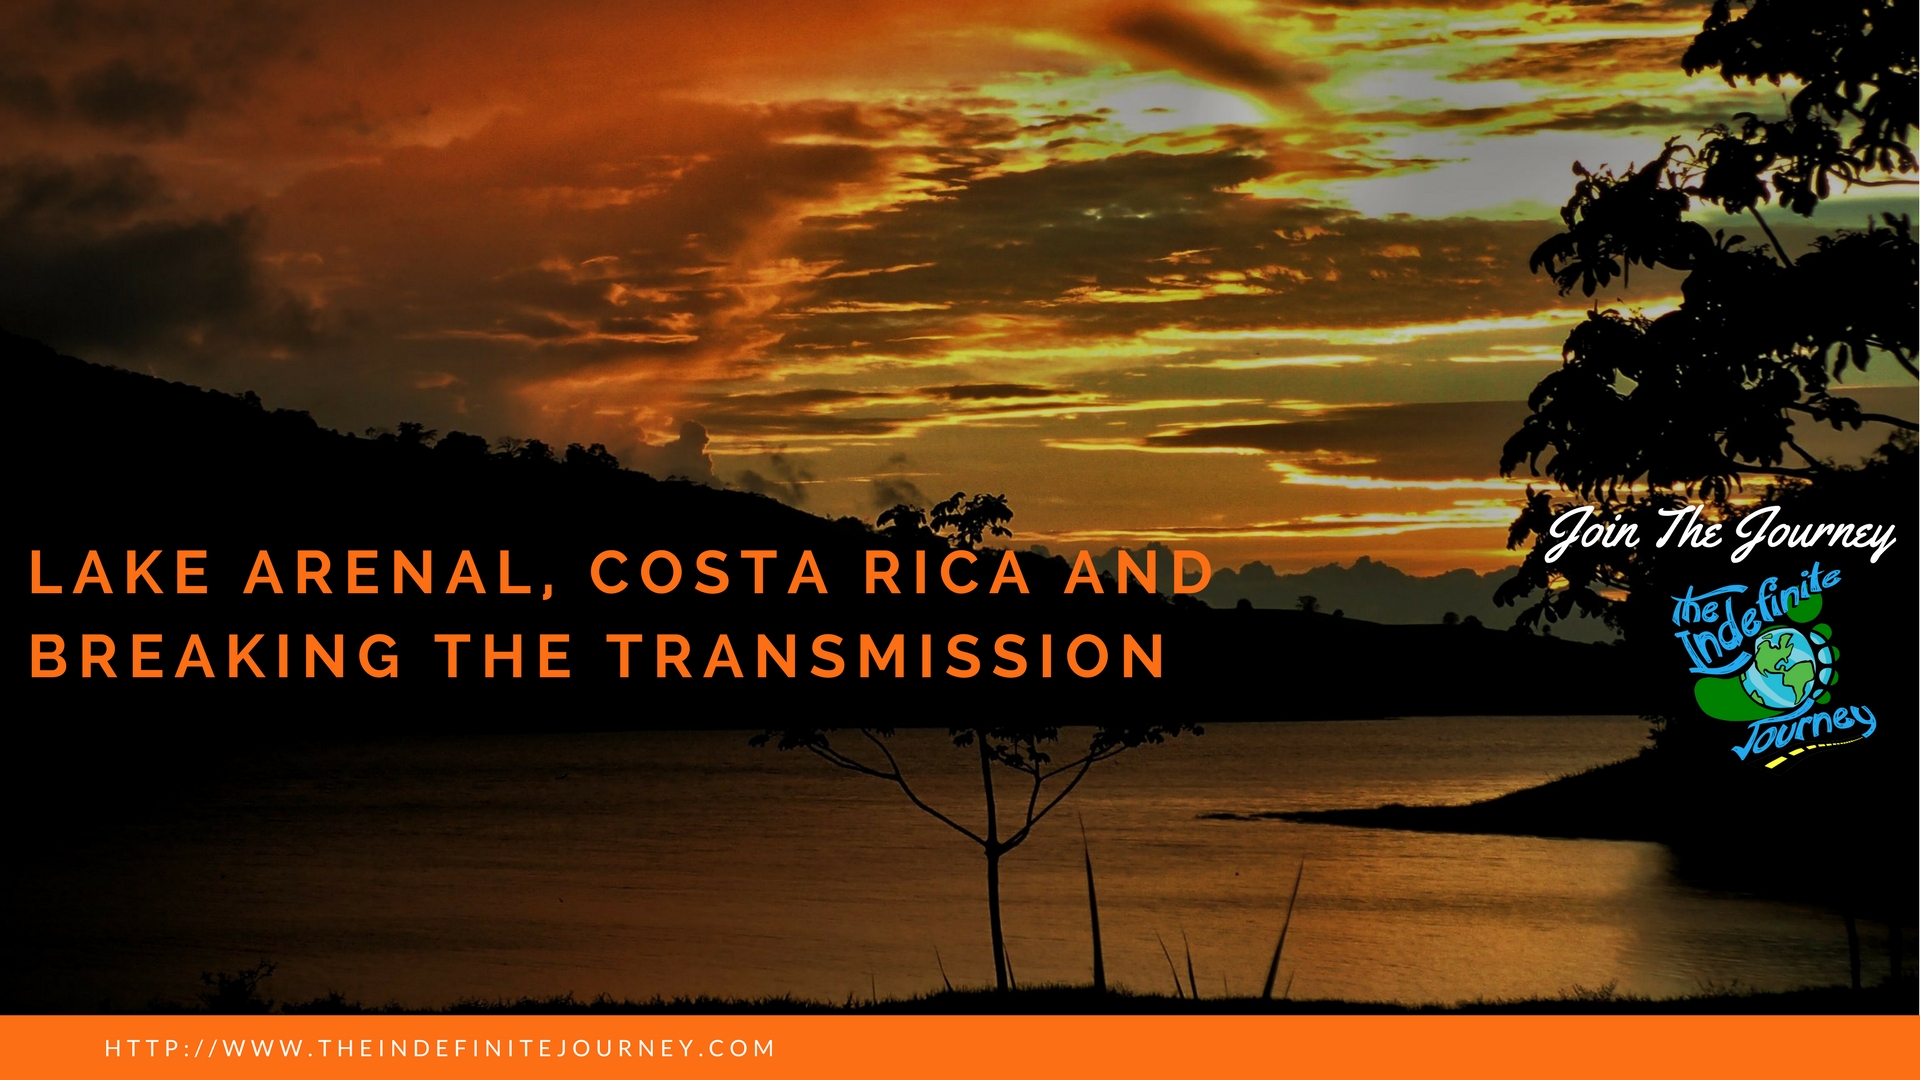 Lake Arenal, Costa Rica and Breaking The Transmission